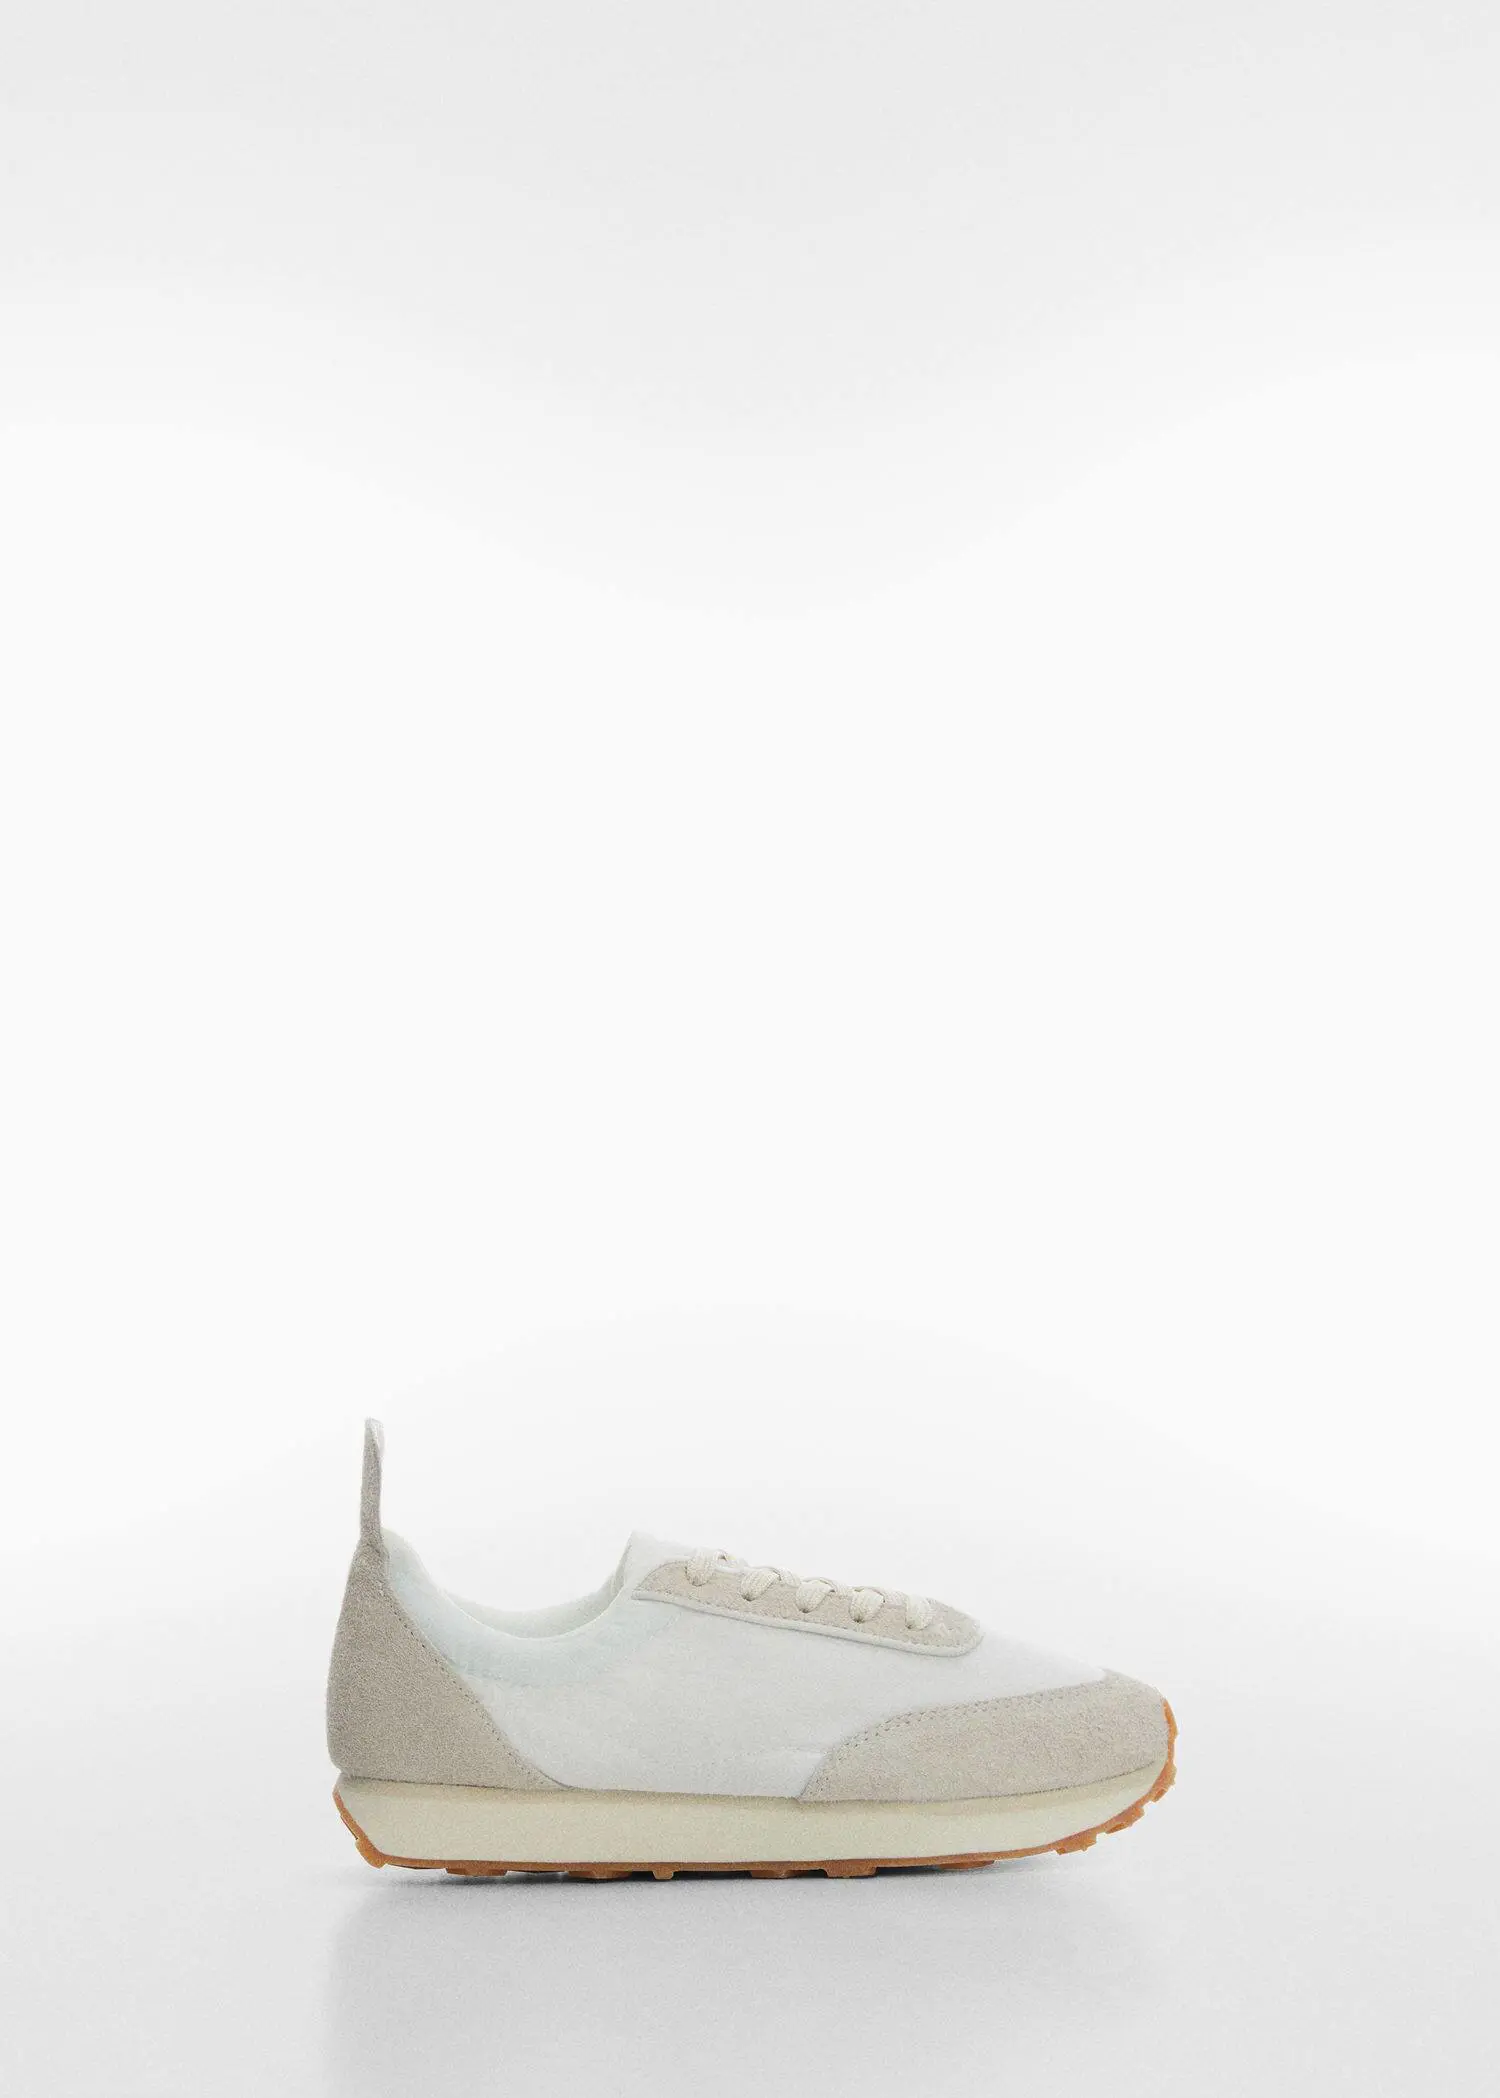 Mango Contrast panel sneakers. a pair of white shoes on a white background 